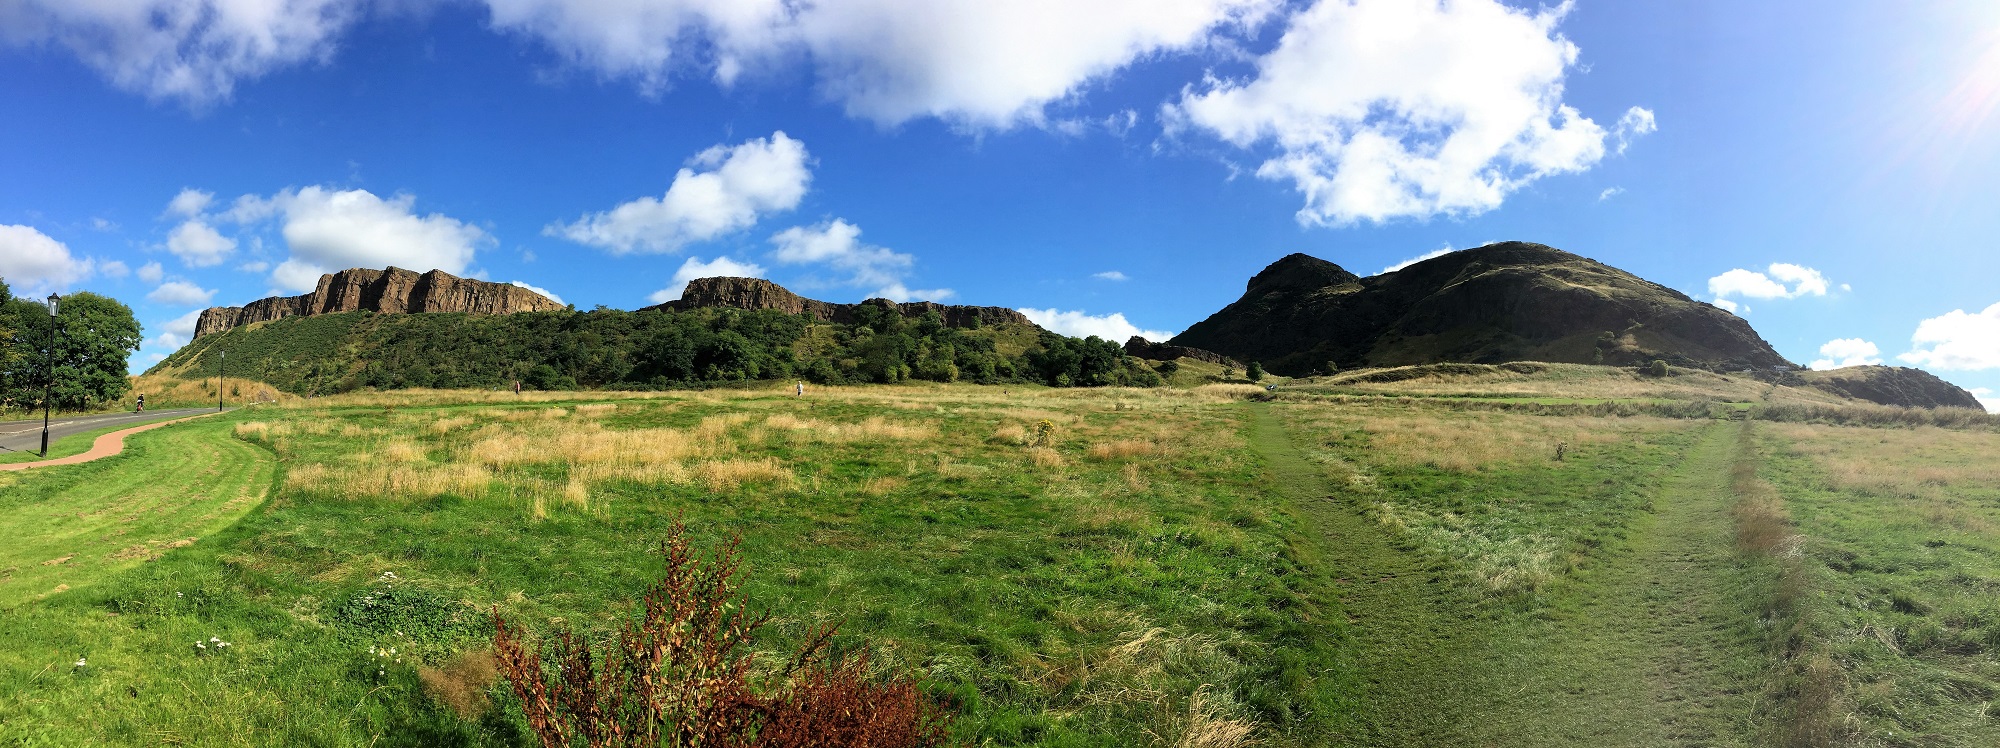 Holyrood Park from below.